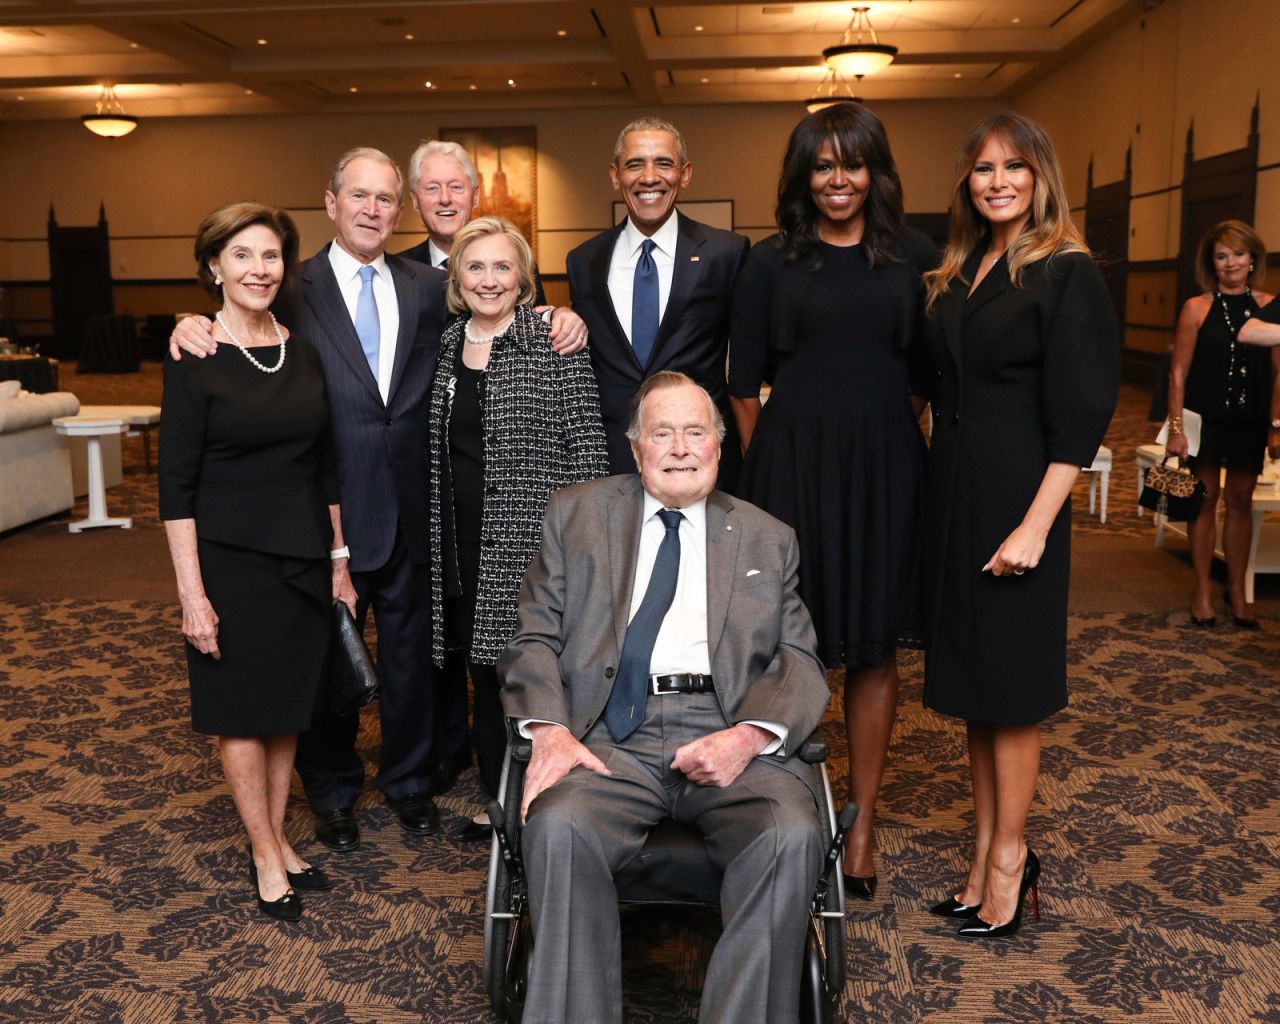 Bush joins former presidents and first ladies at the funeral ceremony for his wife in April 2018. Behind Bush, from left, are Laura Bush, George W. Bush, Bill Clinton, Hillary Clinton, Barack Obama, Michelle Obama and current first lady Melania Trump.